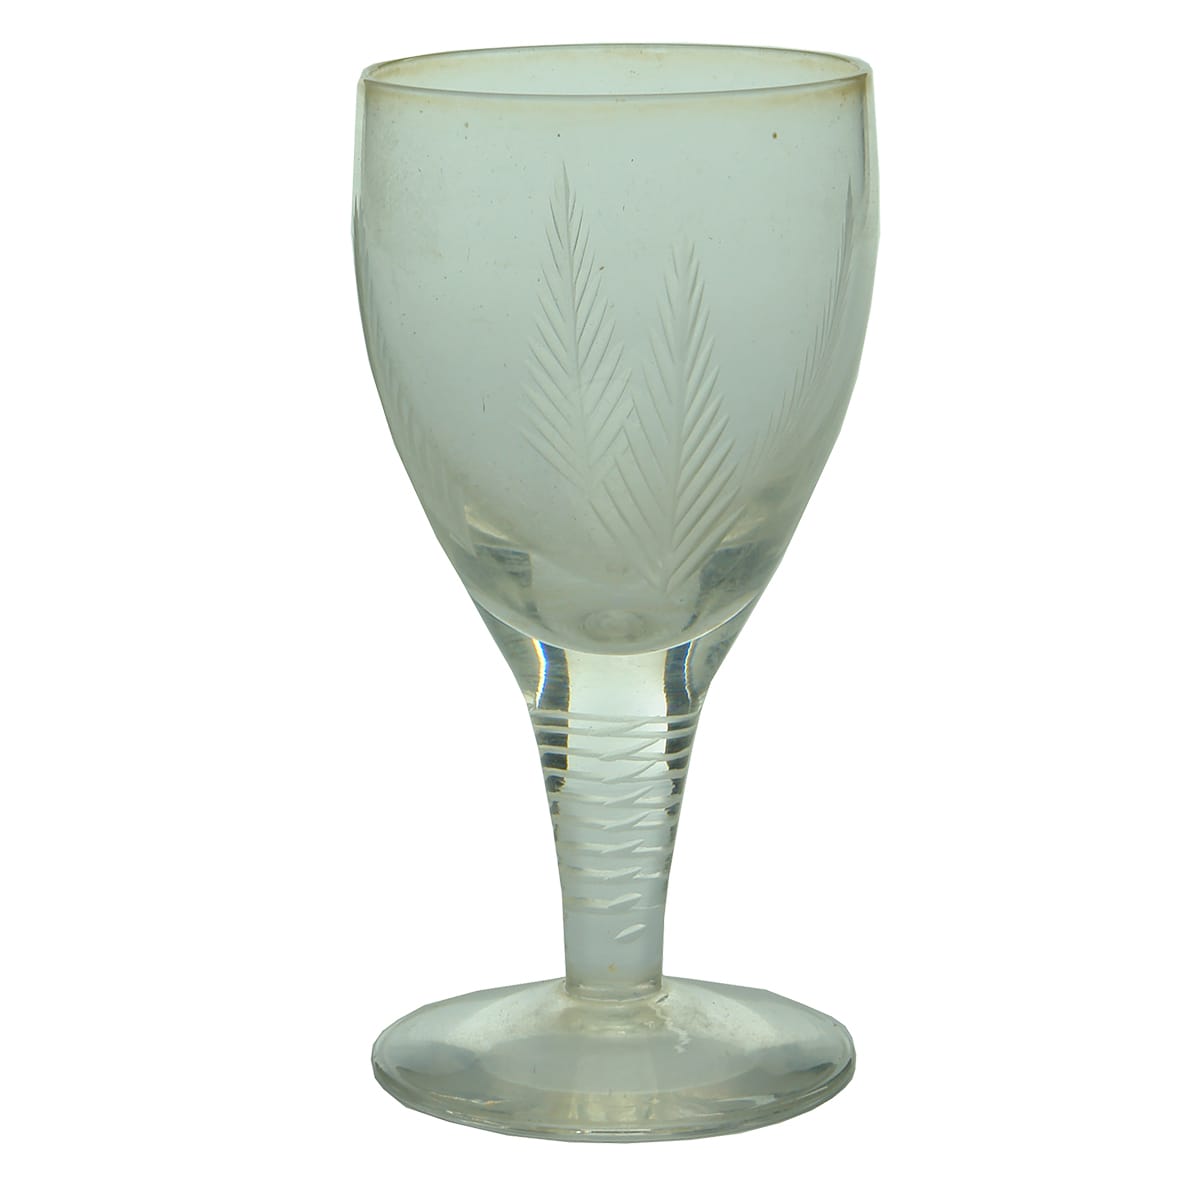 Glass. Early glass with stem and fern leaf design etched to bowl.